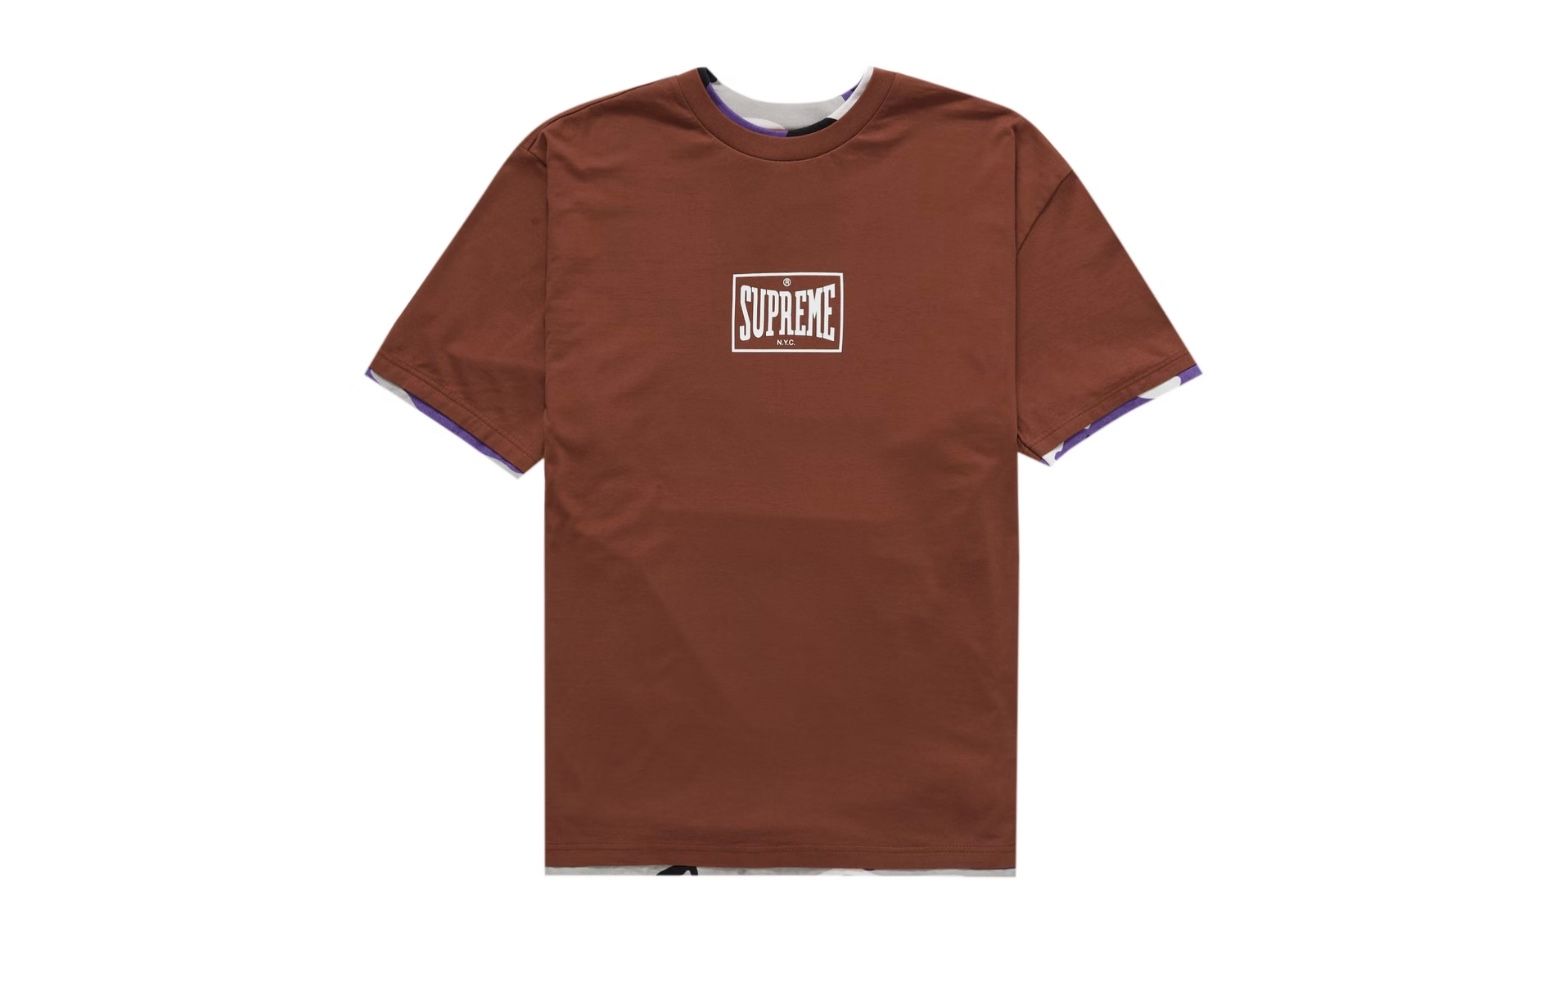 Supreme Supreme Layered S/S Top in Brown - Large | Grailed